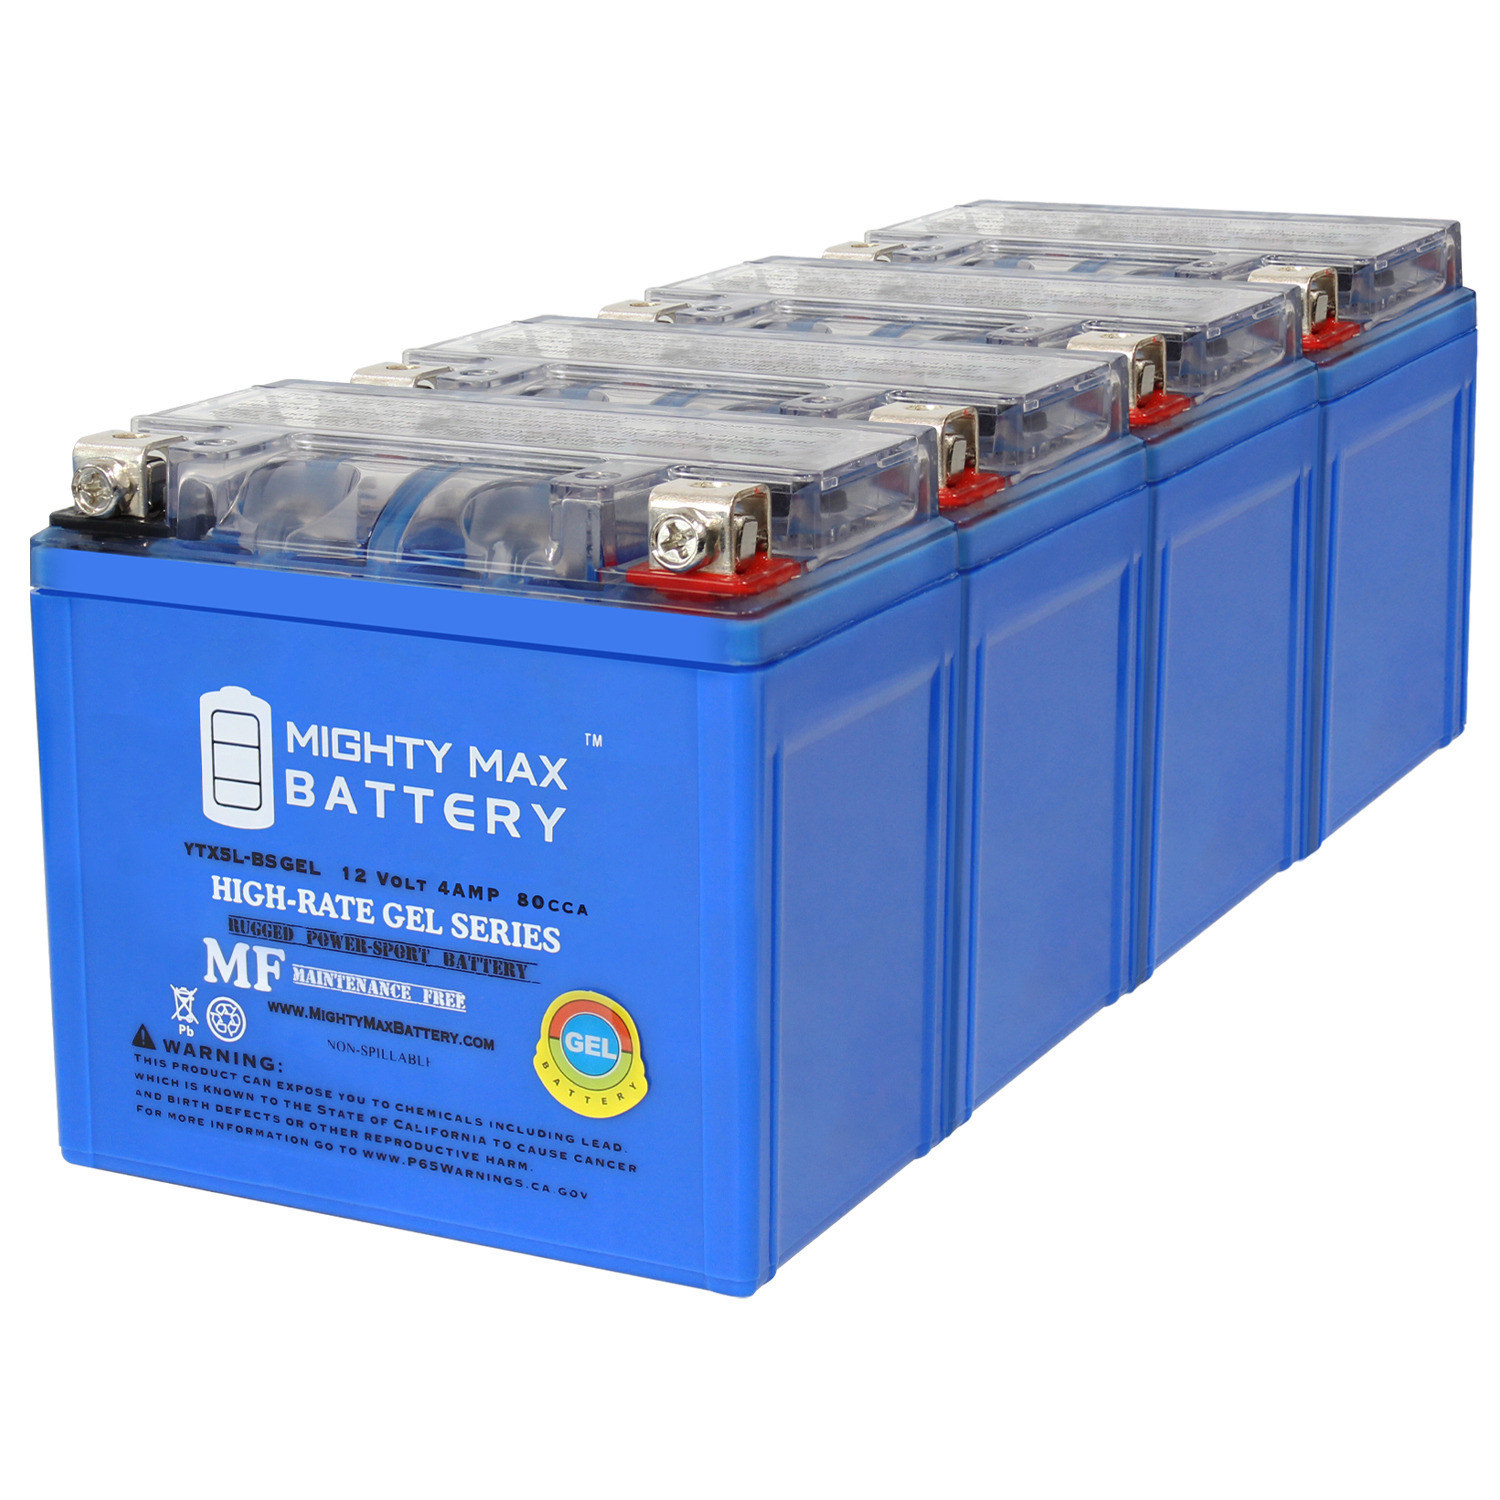 YTX5L-BSGEL 12V 4AH Replacement Battery compatible with KTM 525XC-W Motorcycle 07-09 - 4 Pack